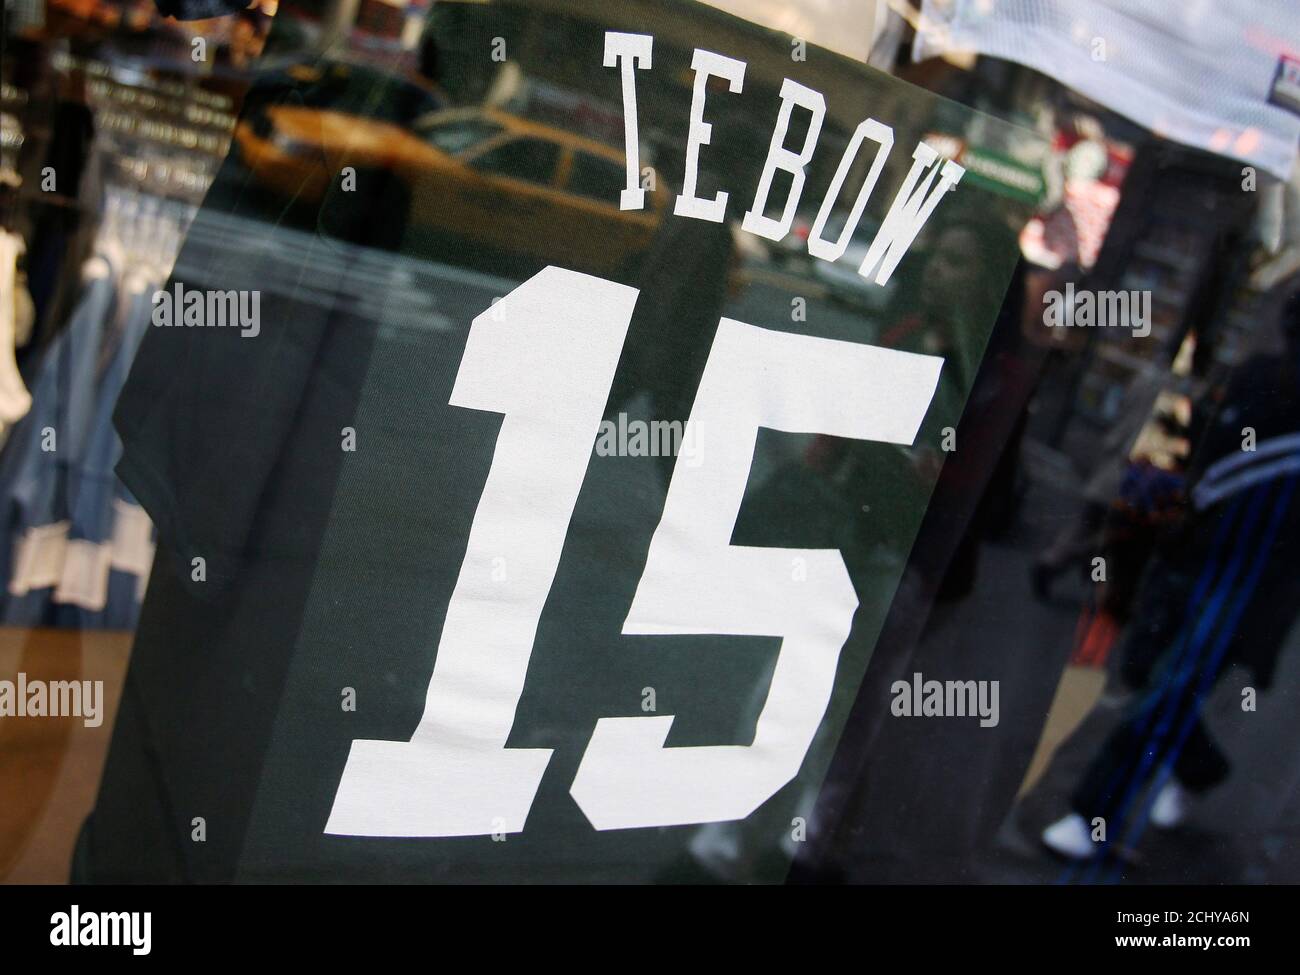 Tim Tebow's New York Jets shirts are put up for display in New York March 23, 2012. Trading for Tim Tebow and bringing 'Tebowmania' to New York quickened the pulse of Jets fans in the Big Apple, which has already had a 'Linsane' love affair this winter with the heartwarming rise of unsung Jeremy Lin with the NBA's Knicks. REUTERS/Shannon Stapleton (UNITED STATES - Tags: SPORT BUSINESS) Stock Photo